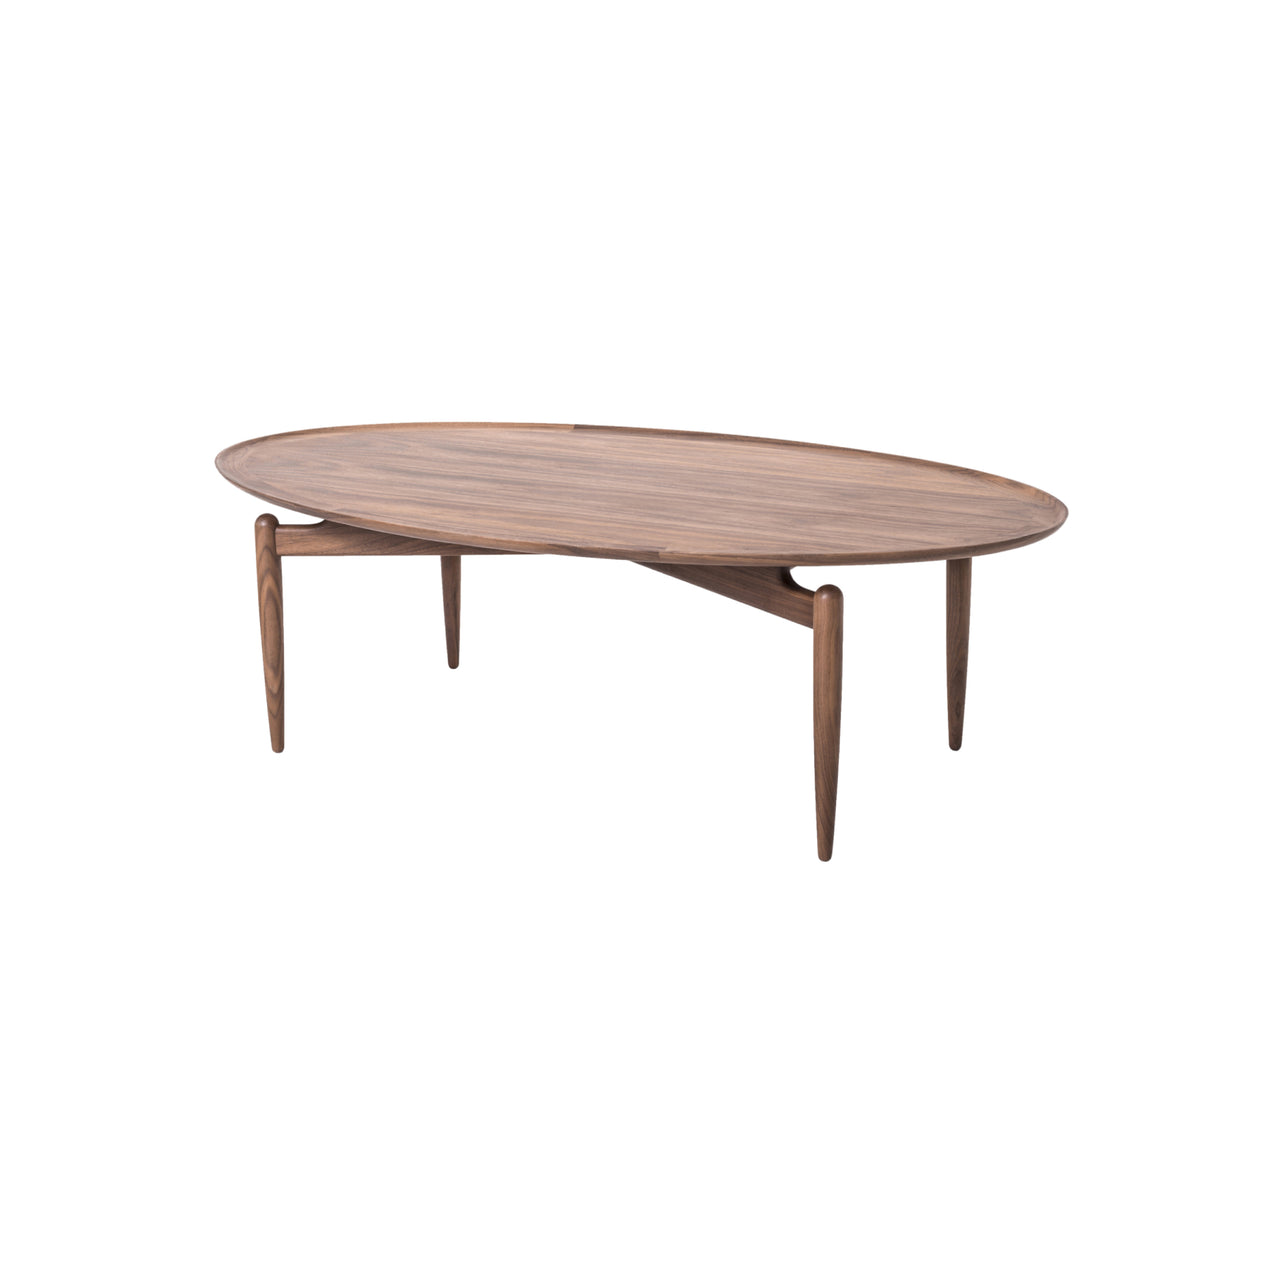 Slow Coffee Table: Natural Walnut + Oval